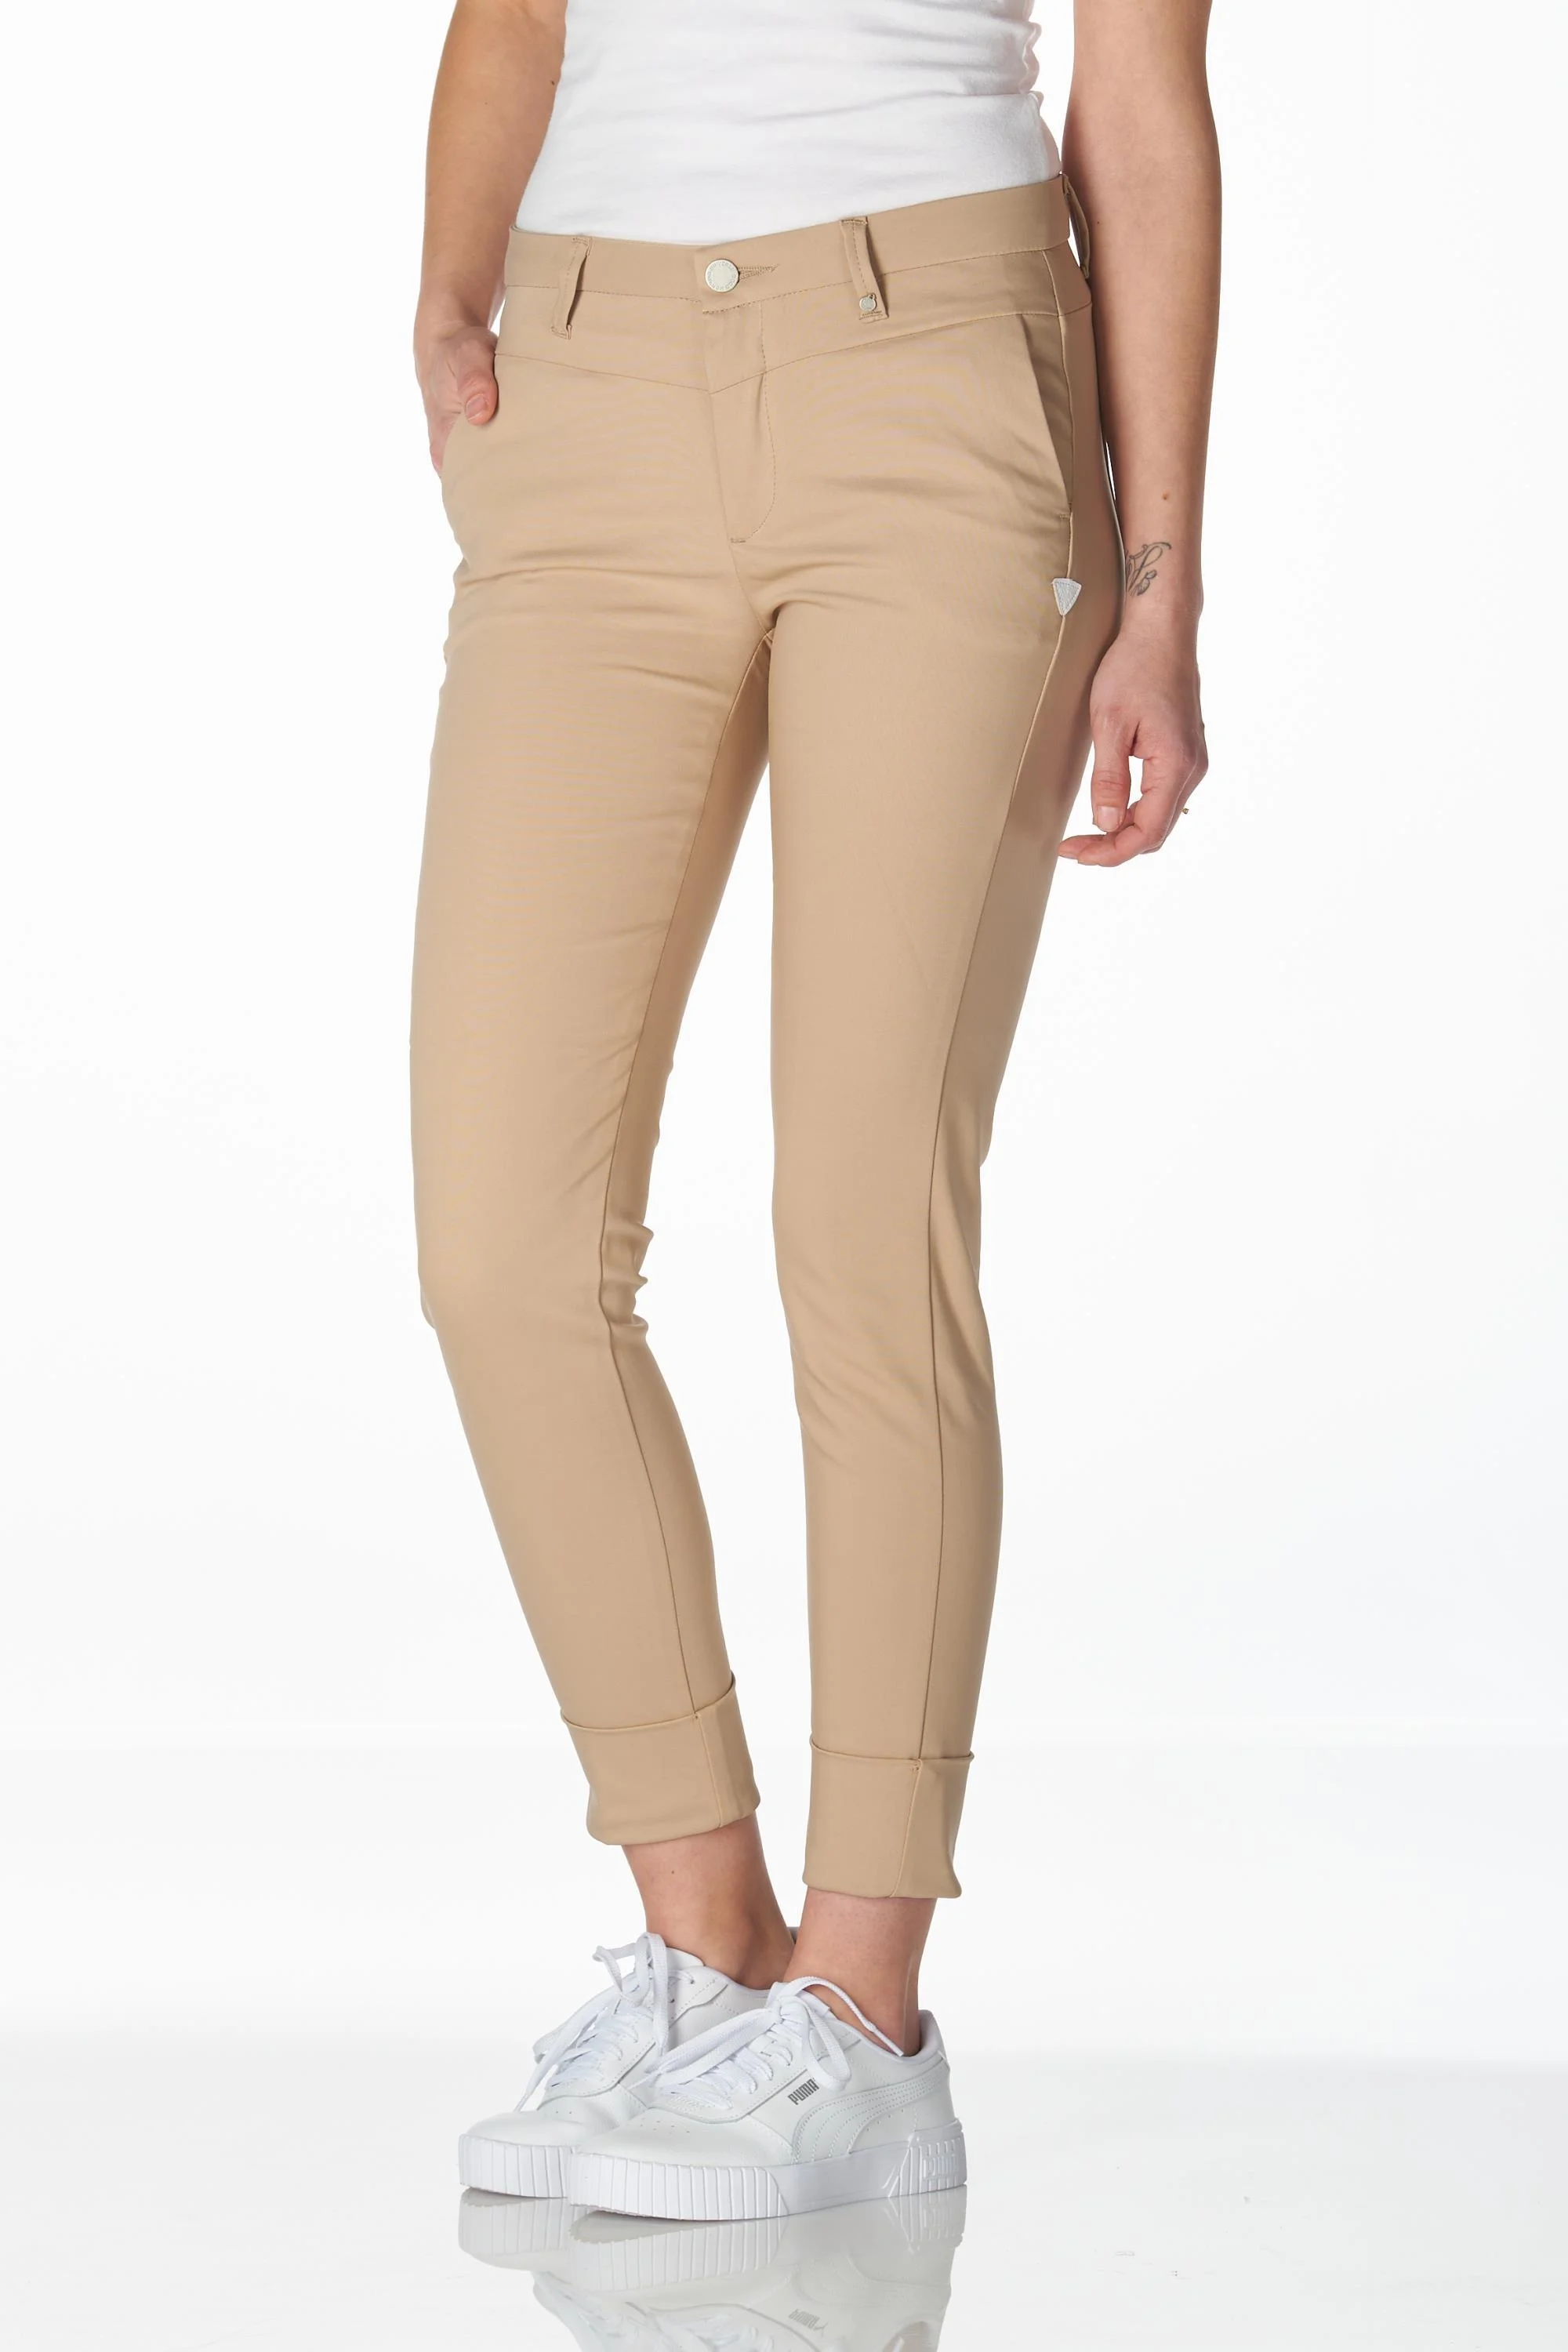 Lola ankle chino sand